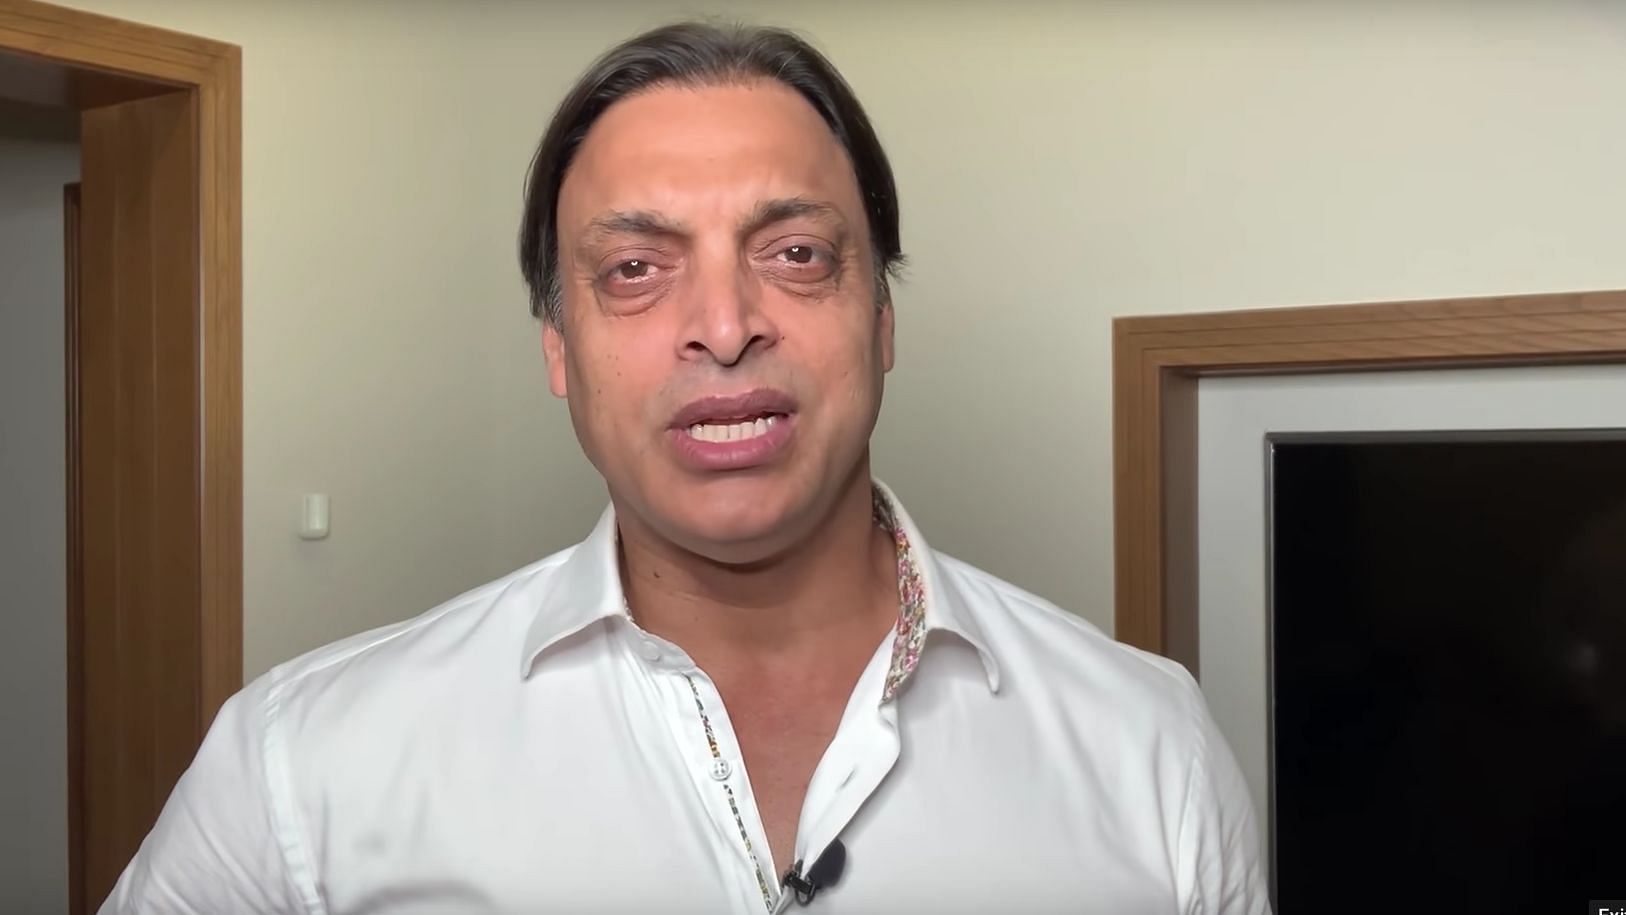 Shoaib Akhtar has talked about the Indian team’s performance after the 2019 ICC World Cup semi-final defeat to New Zealand.